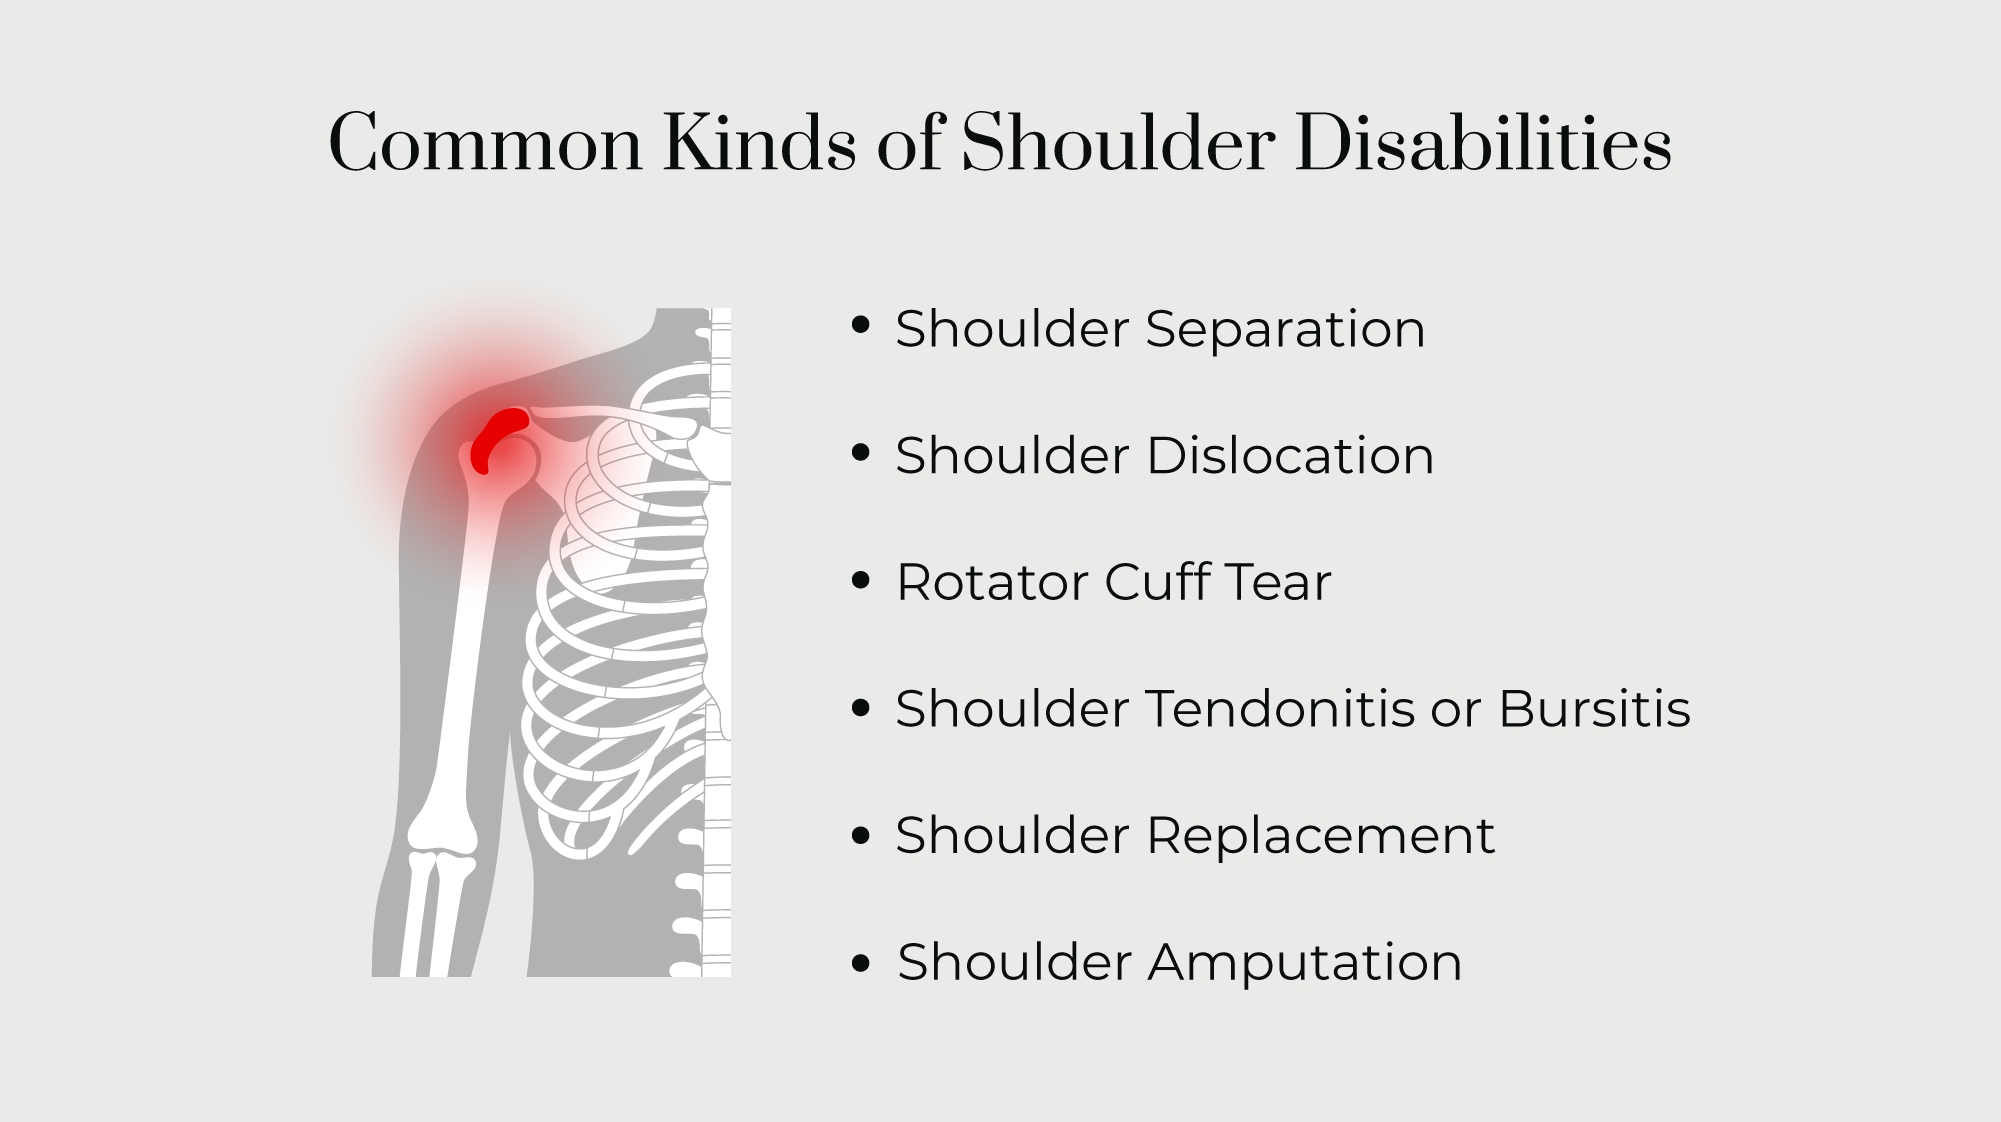 Common kinds of shoulder disabilities